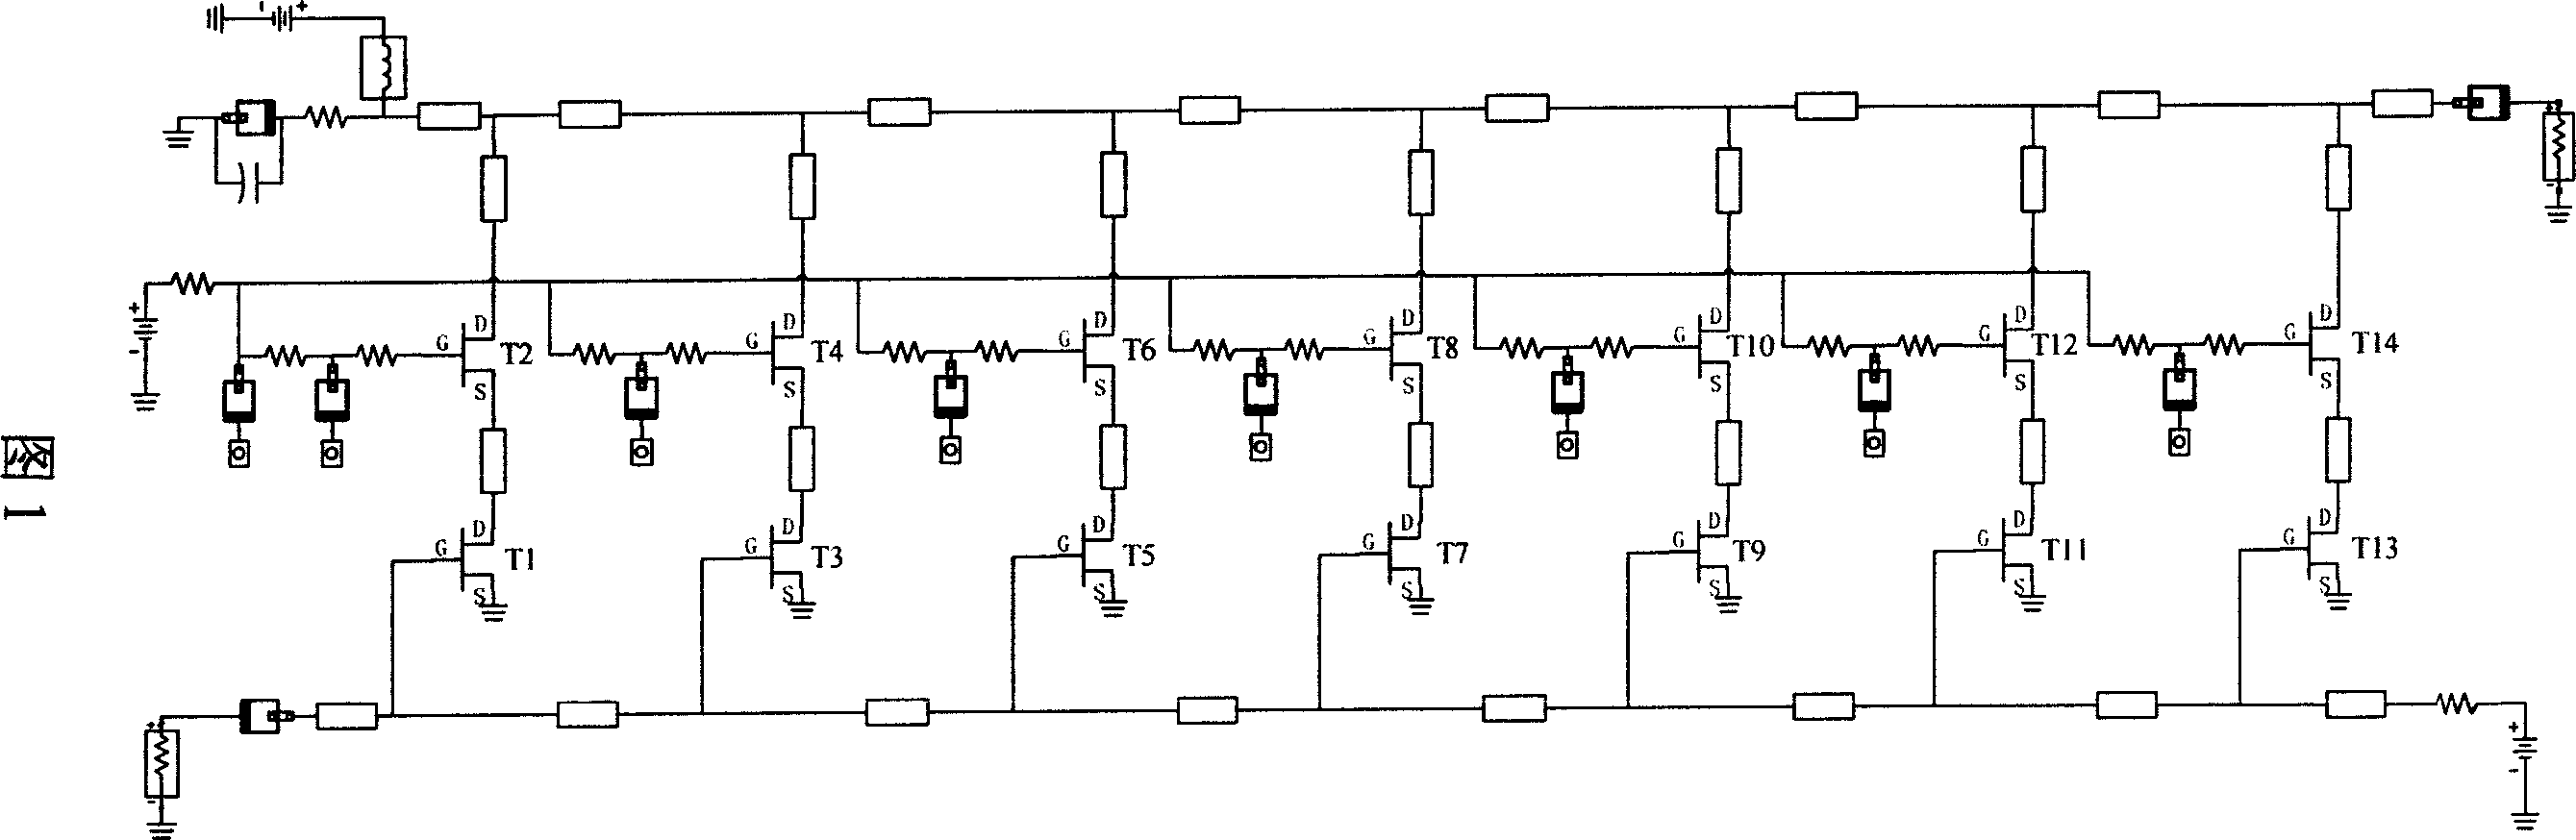 Step travel wave amplifier circuit